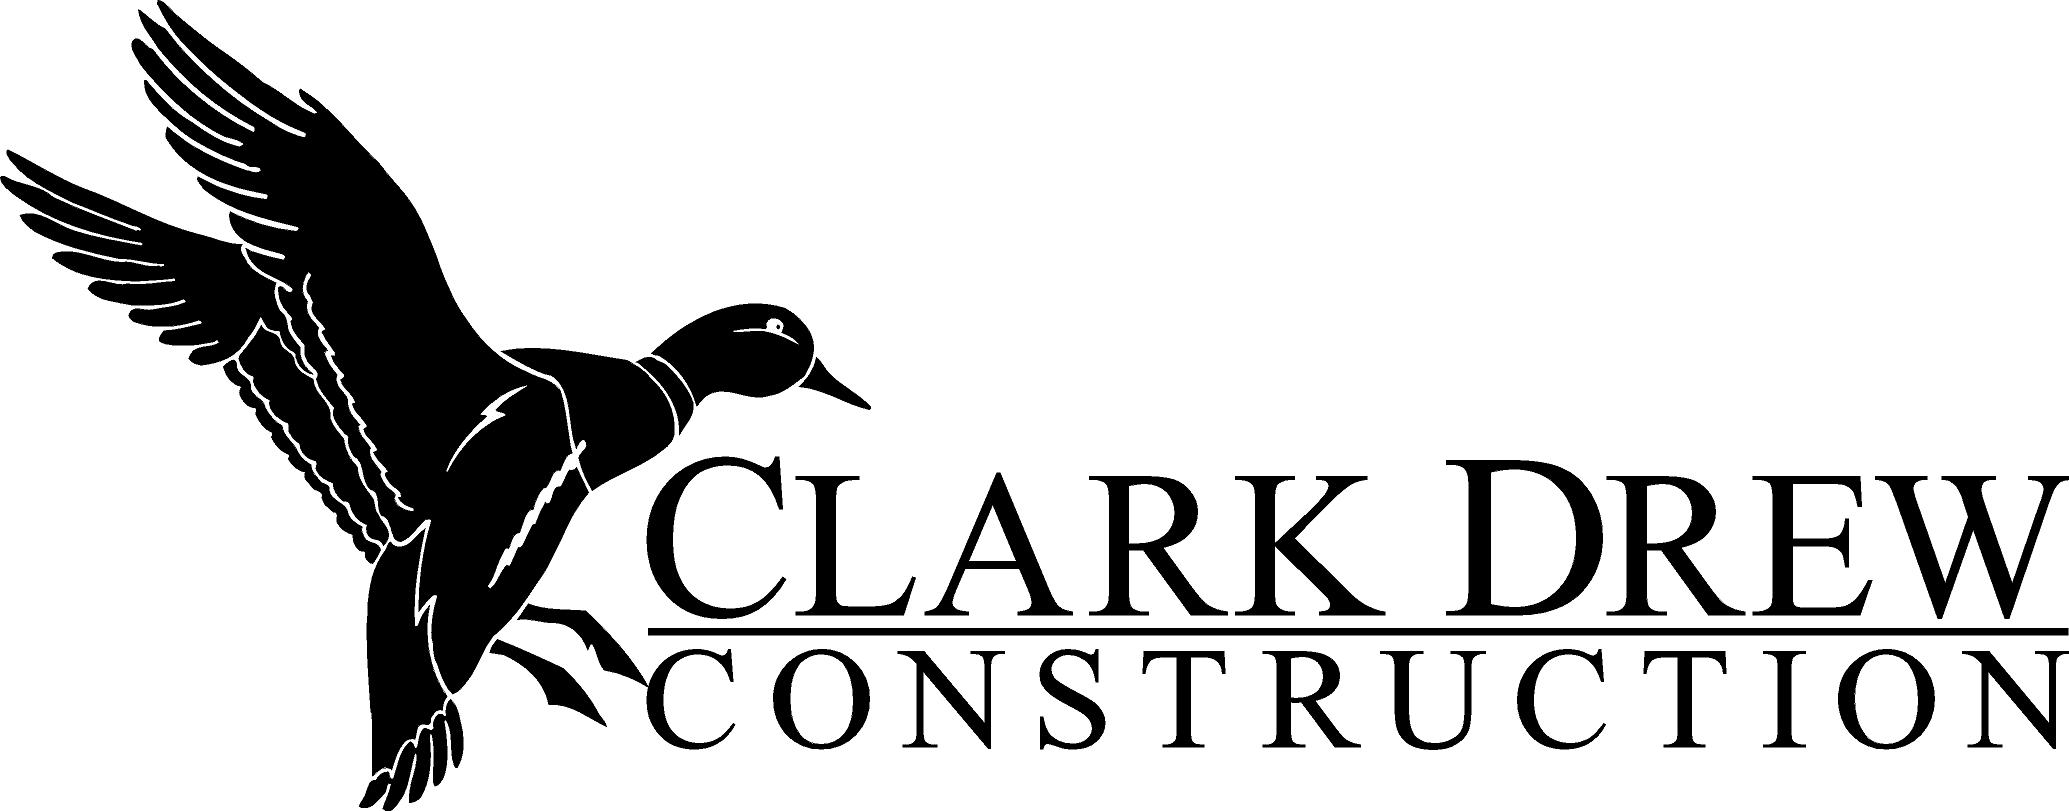 Clark Drew Construction | Brookings, SD | Commercial | Residential | Steel | Concrete